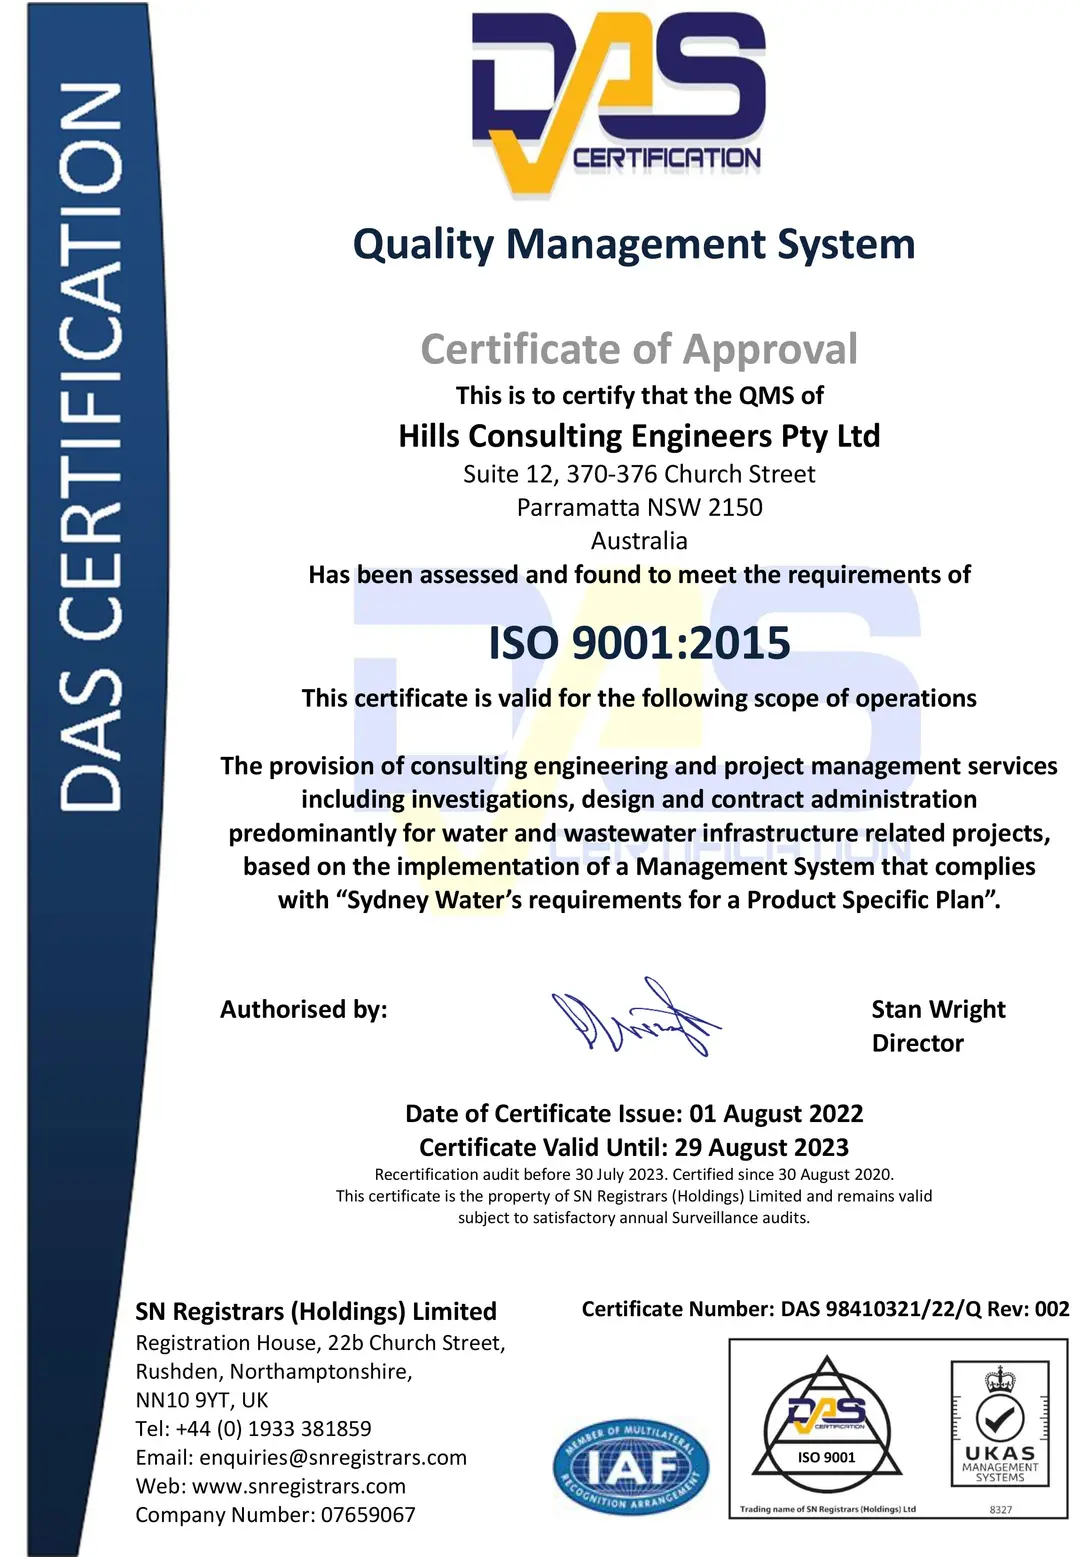 DAS ISO Certificate - Quality Management